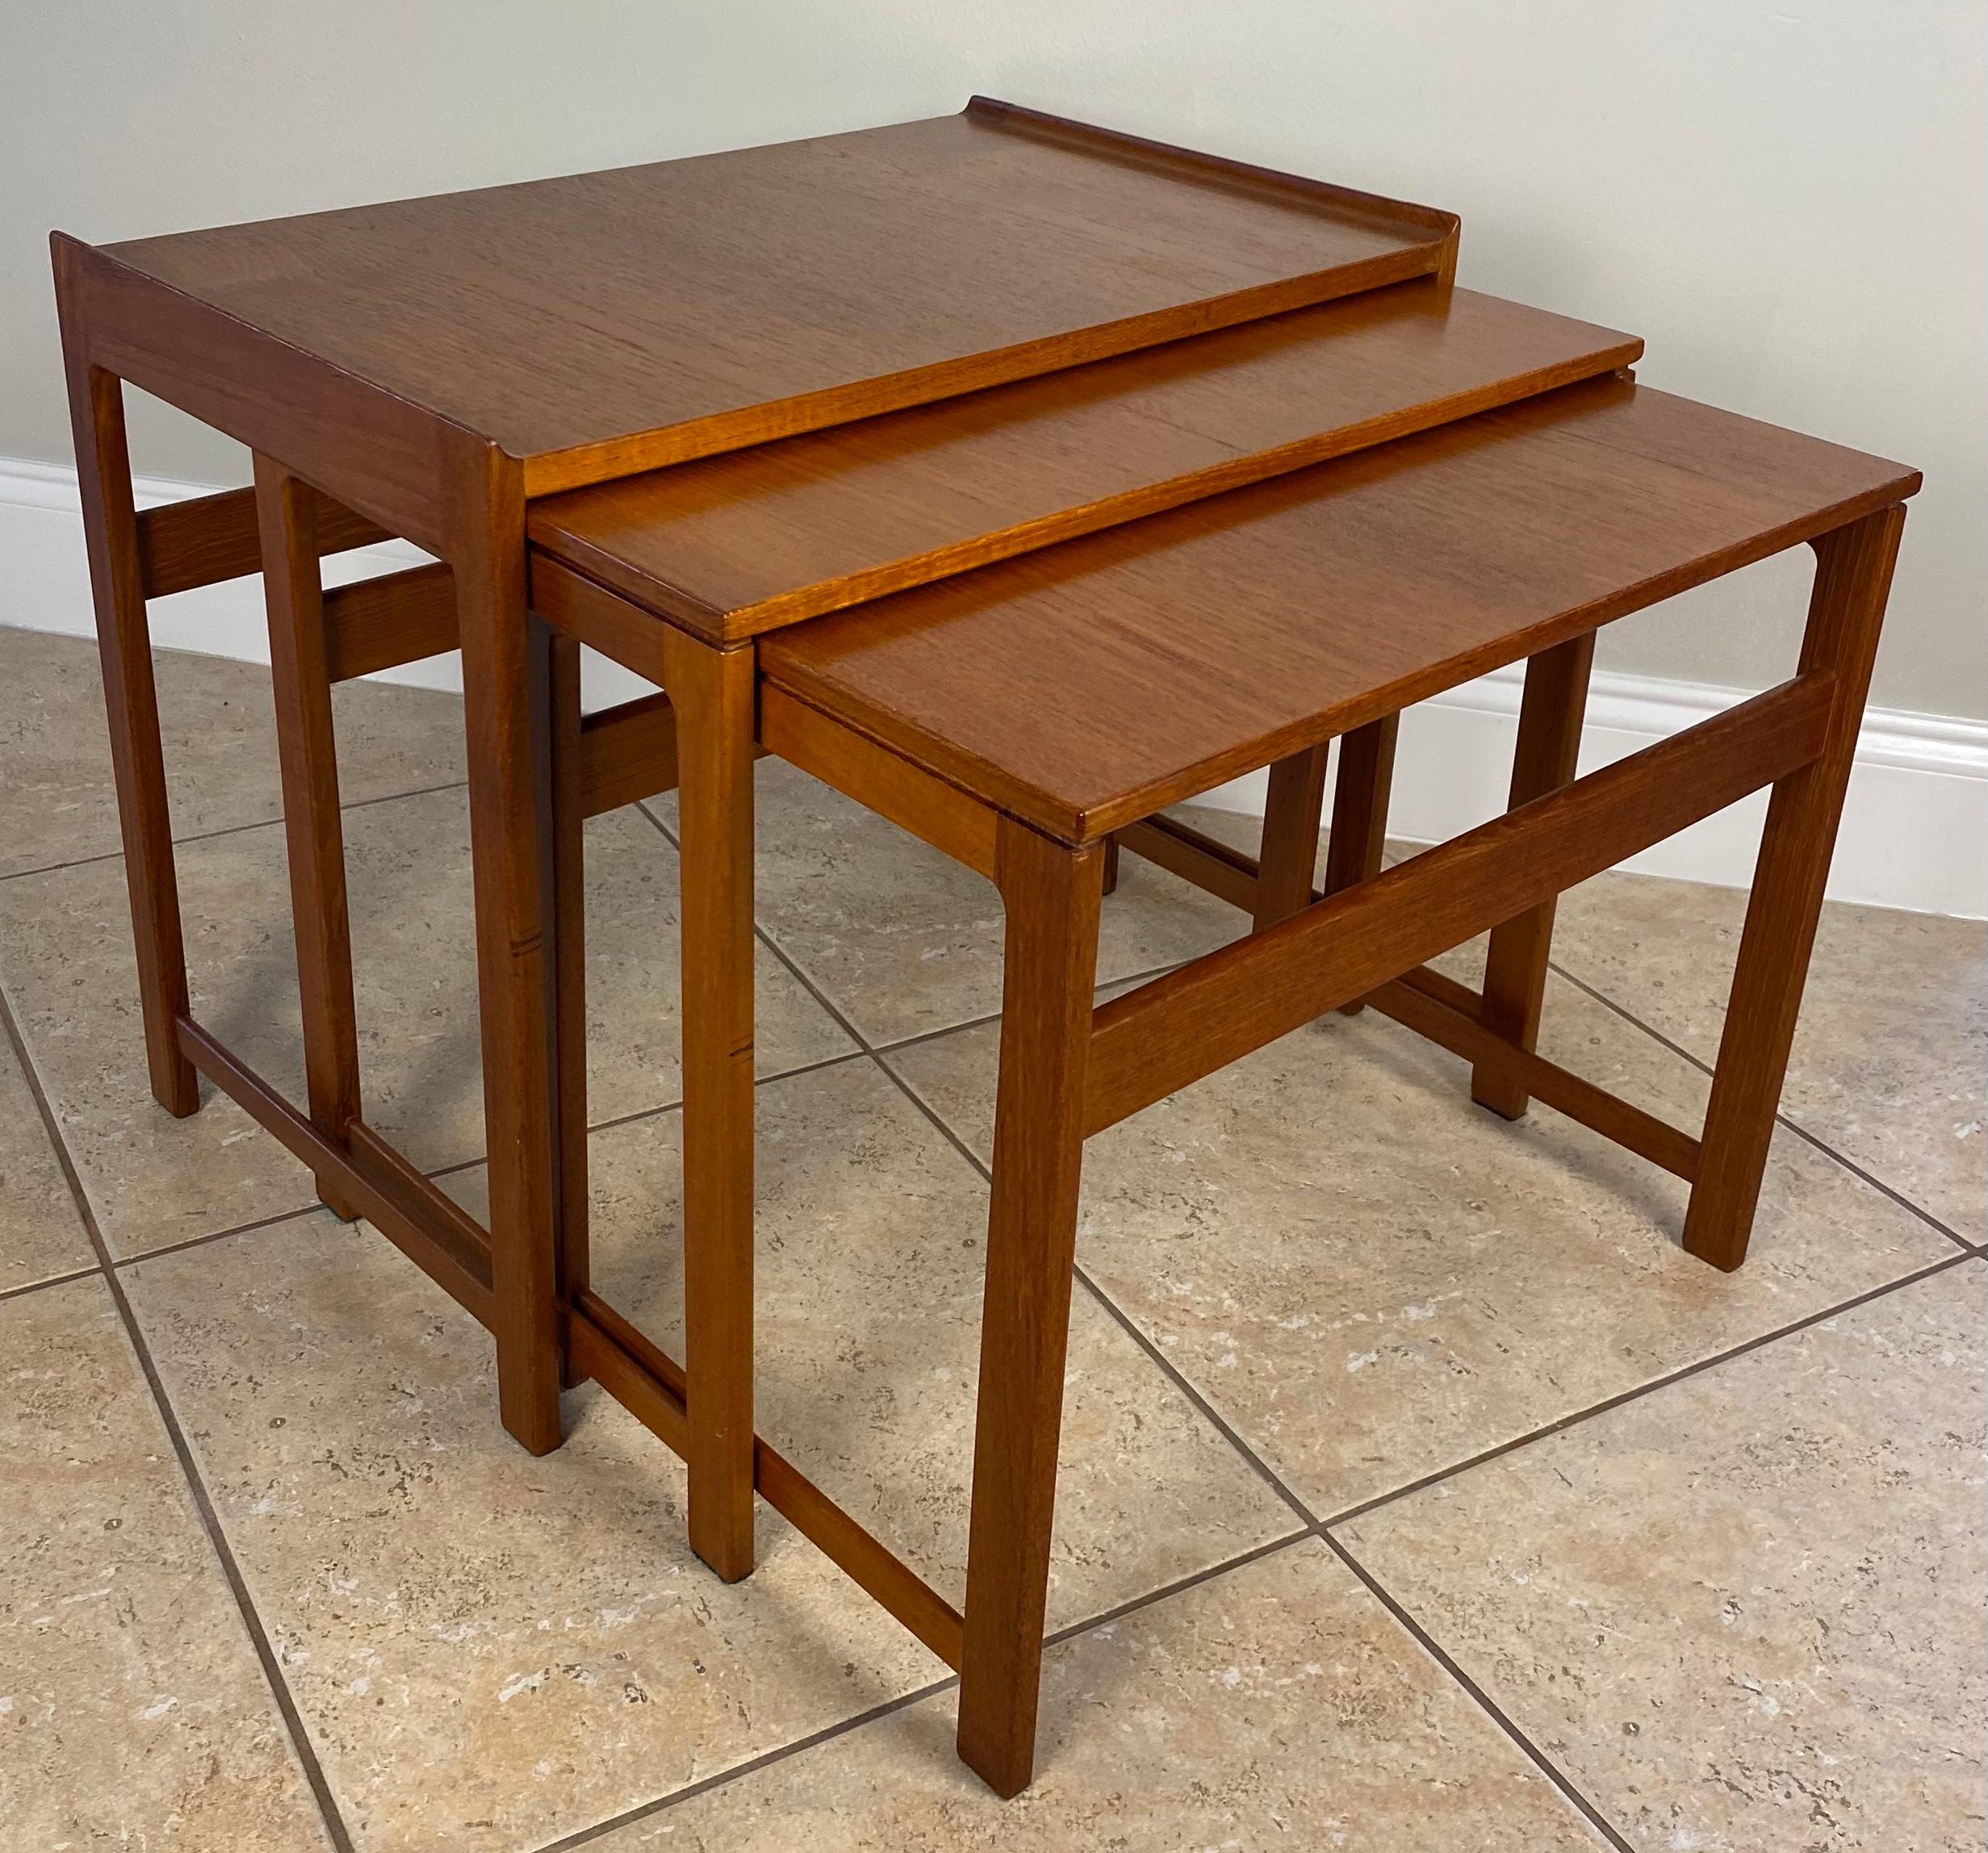 3 Mid-Century Wooden Nesting Tables or Gigogne End Tables Hans J. Wegner Style In Good Condition For Sale In Miami, FL